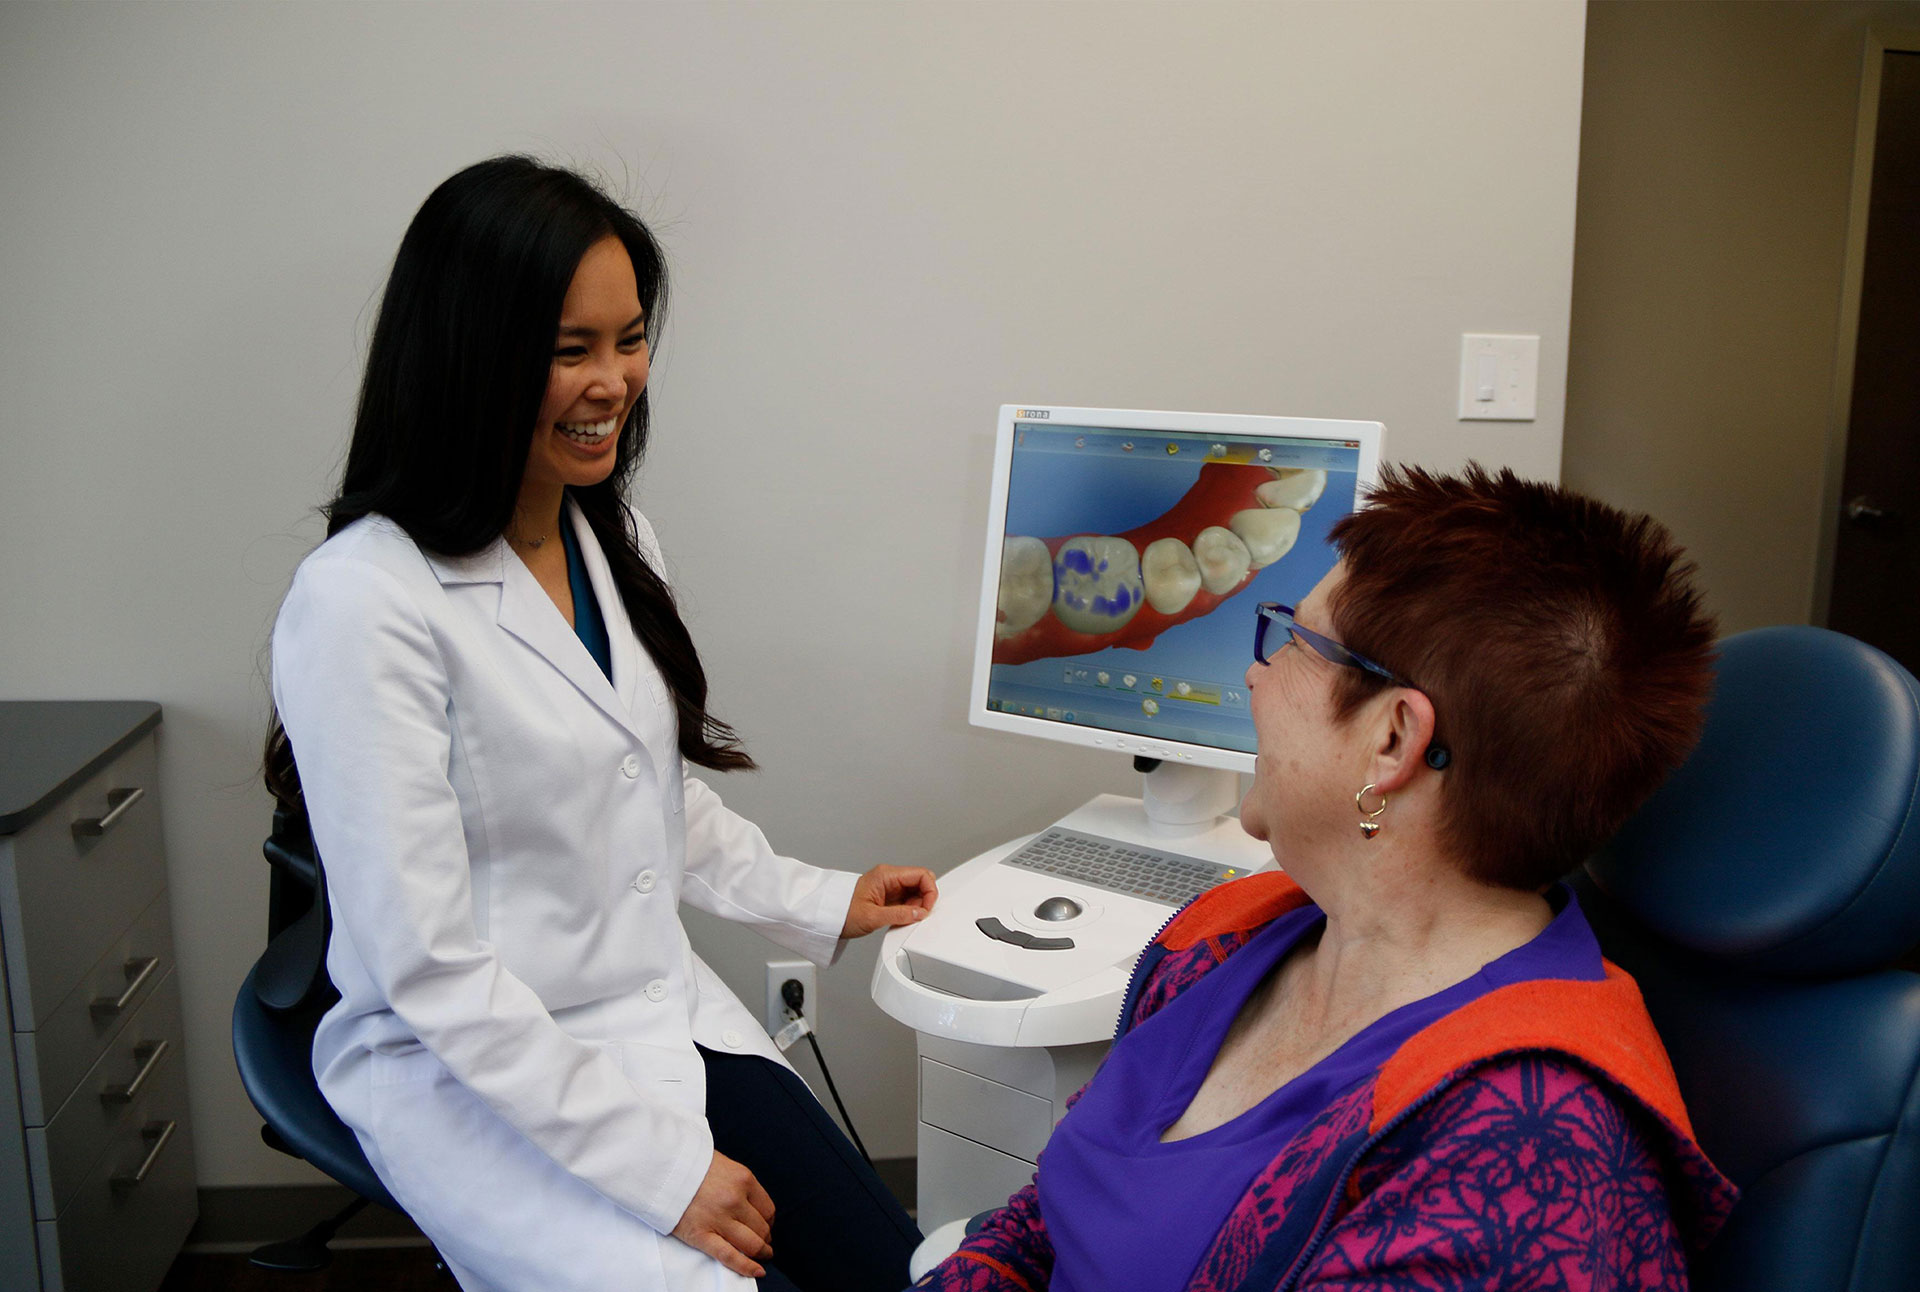 A dental professional in a white coat assisting an older woman with a toothbrush demonstration, set against a clinical background.